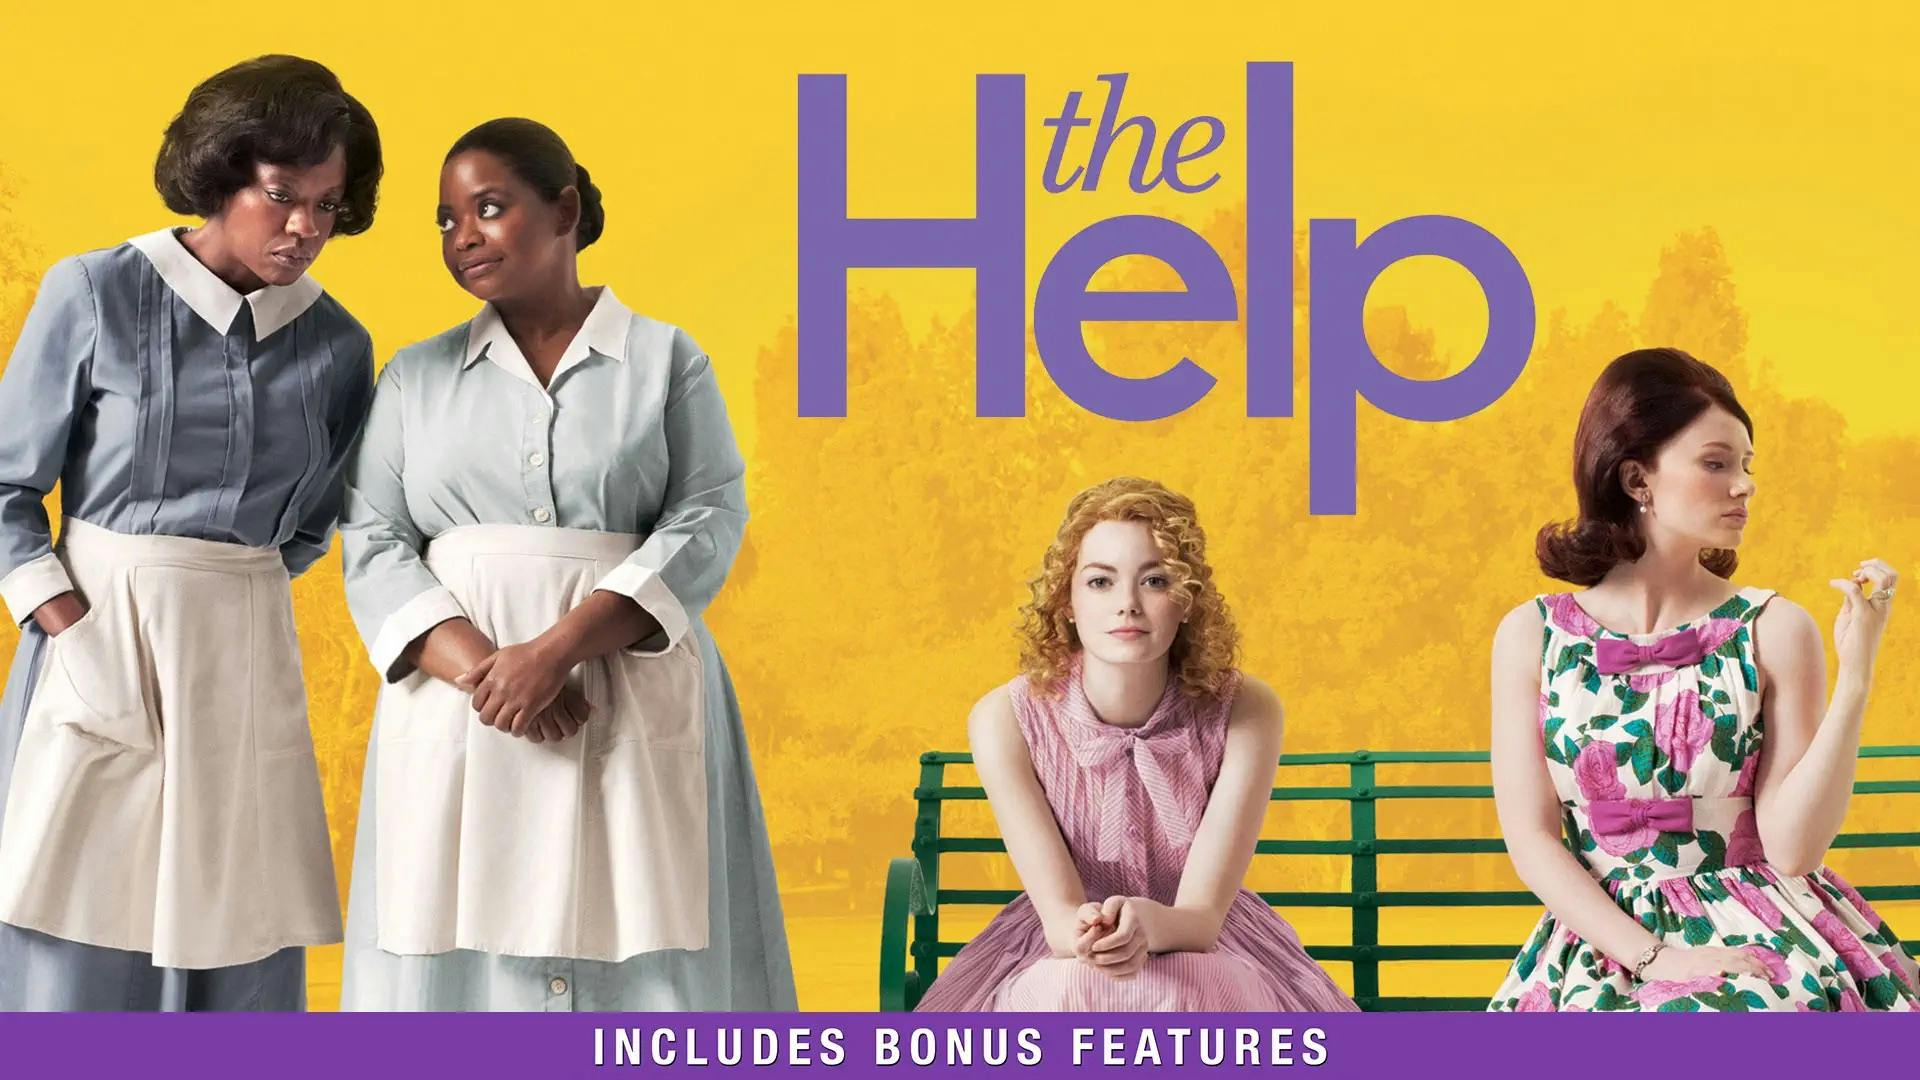 The thumbnail cover for the movie The Help